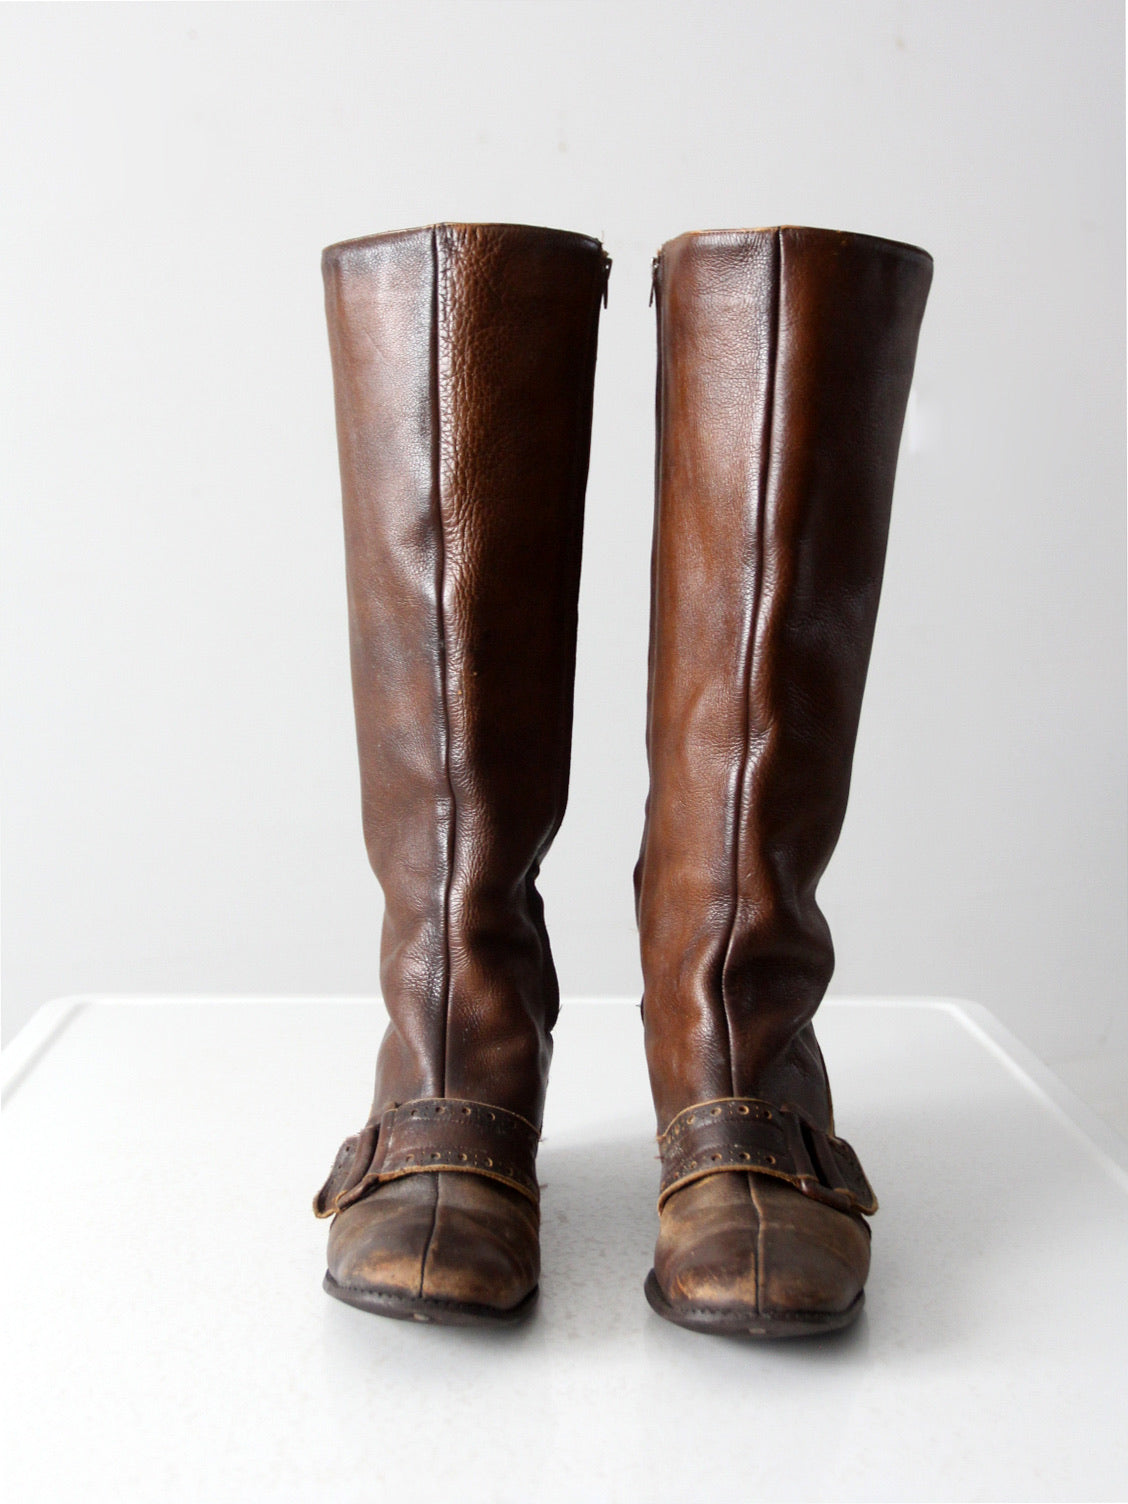 vintage 60s Joyce fleece lined tall leather boots